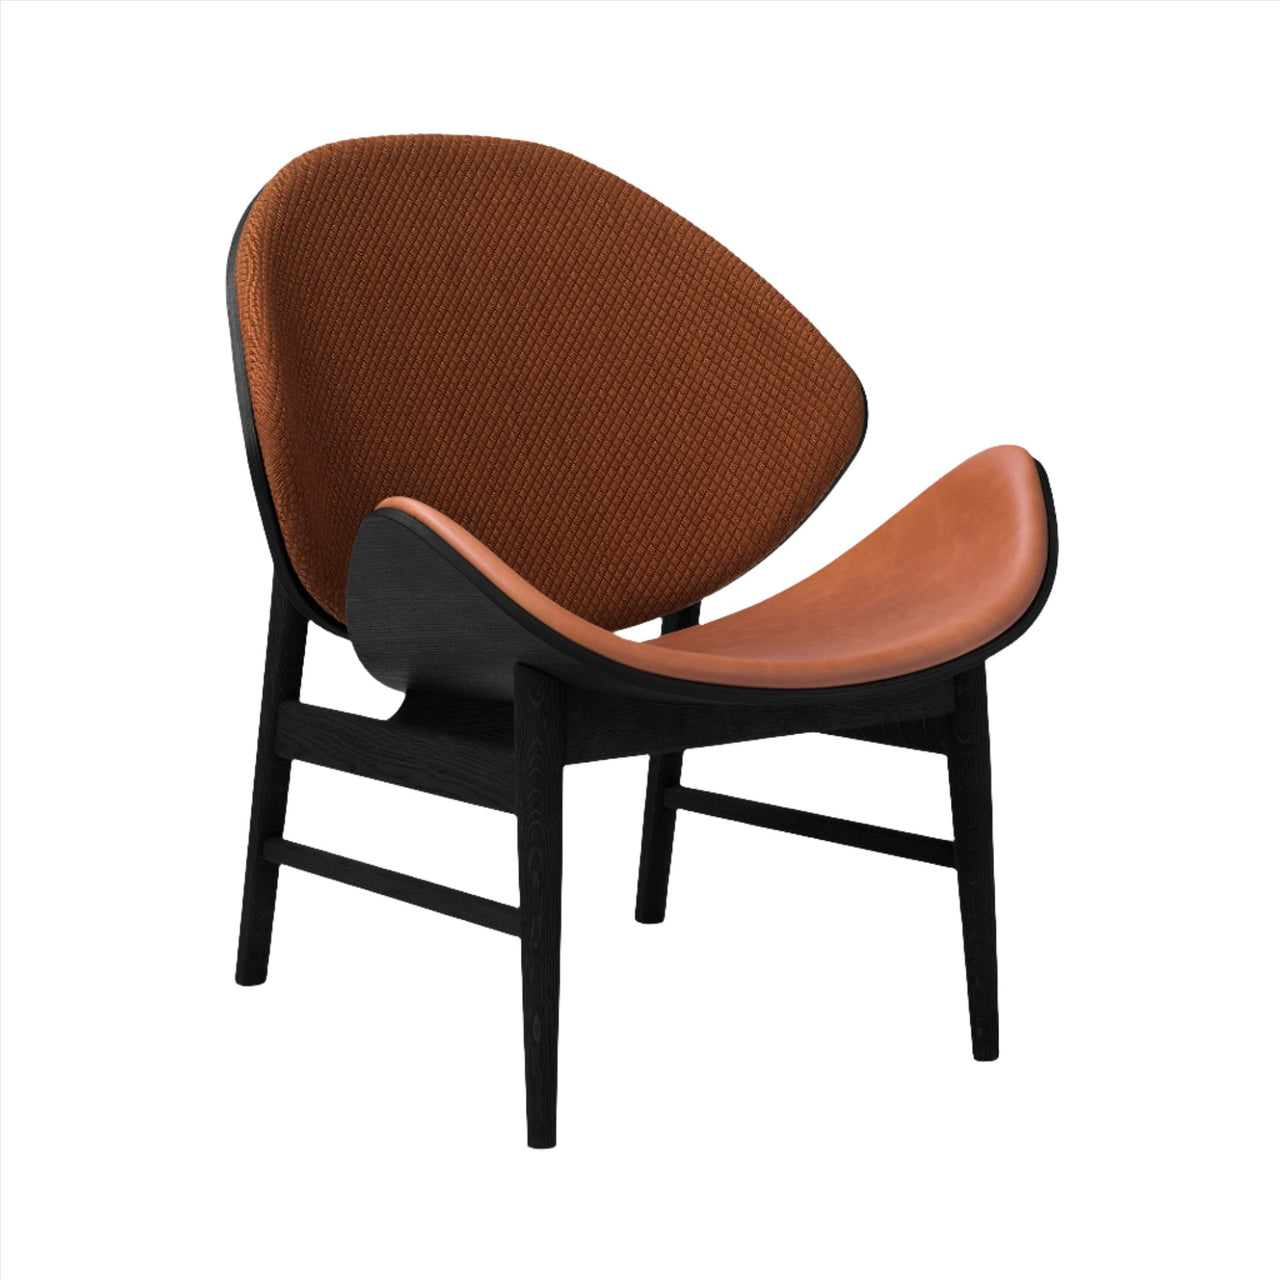 The Orange Lounge Chair: Seat + Back Upholstered + Black Lacquered Oak